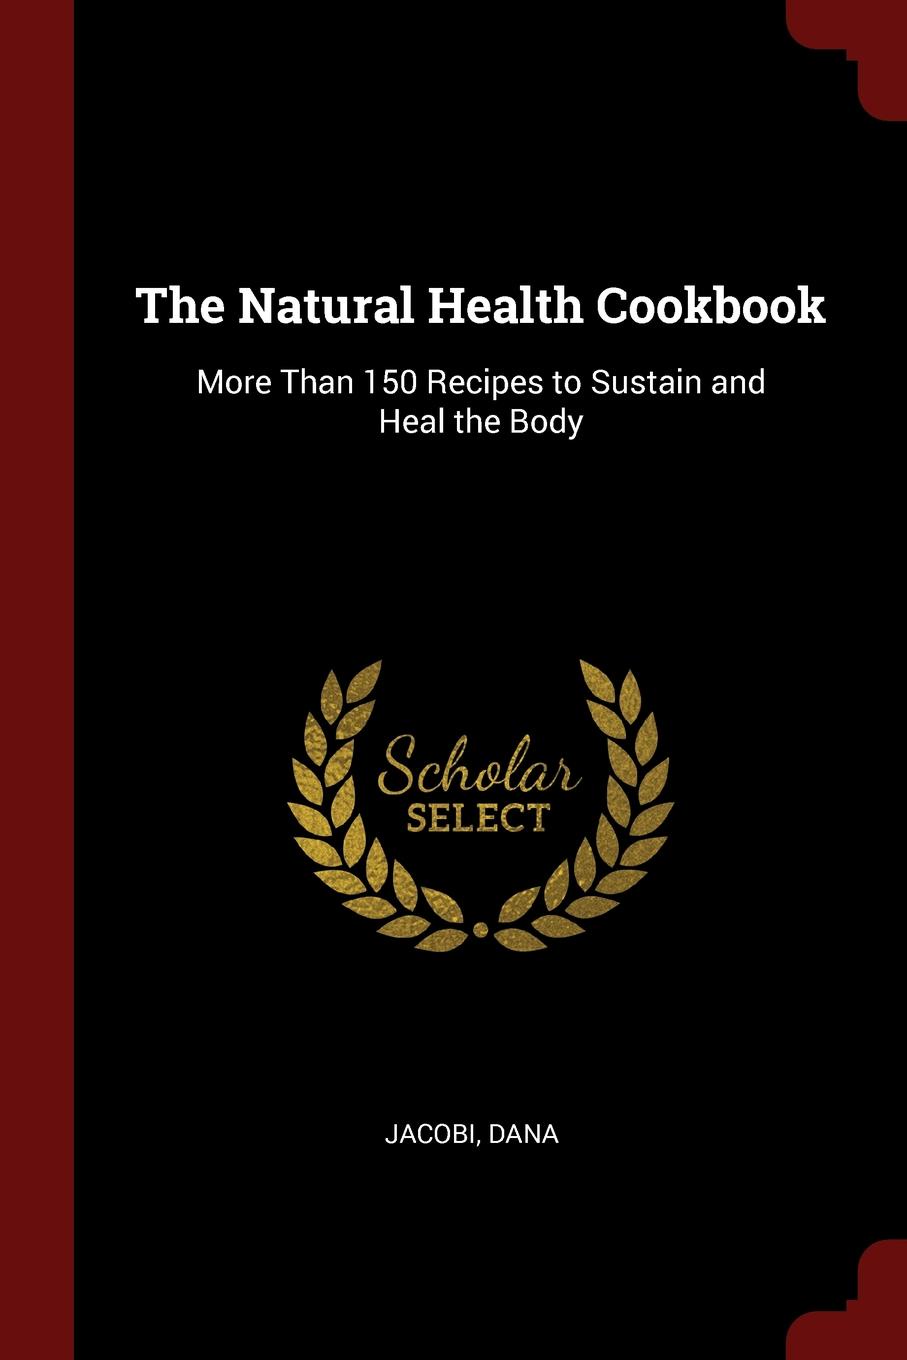 The Natural Health Cookbook. More Than 150 Recipes to Sustain and Heal the Body